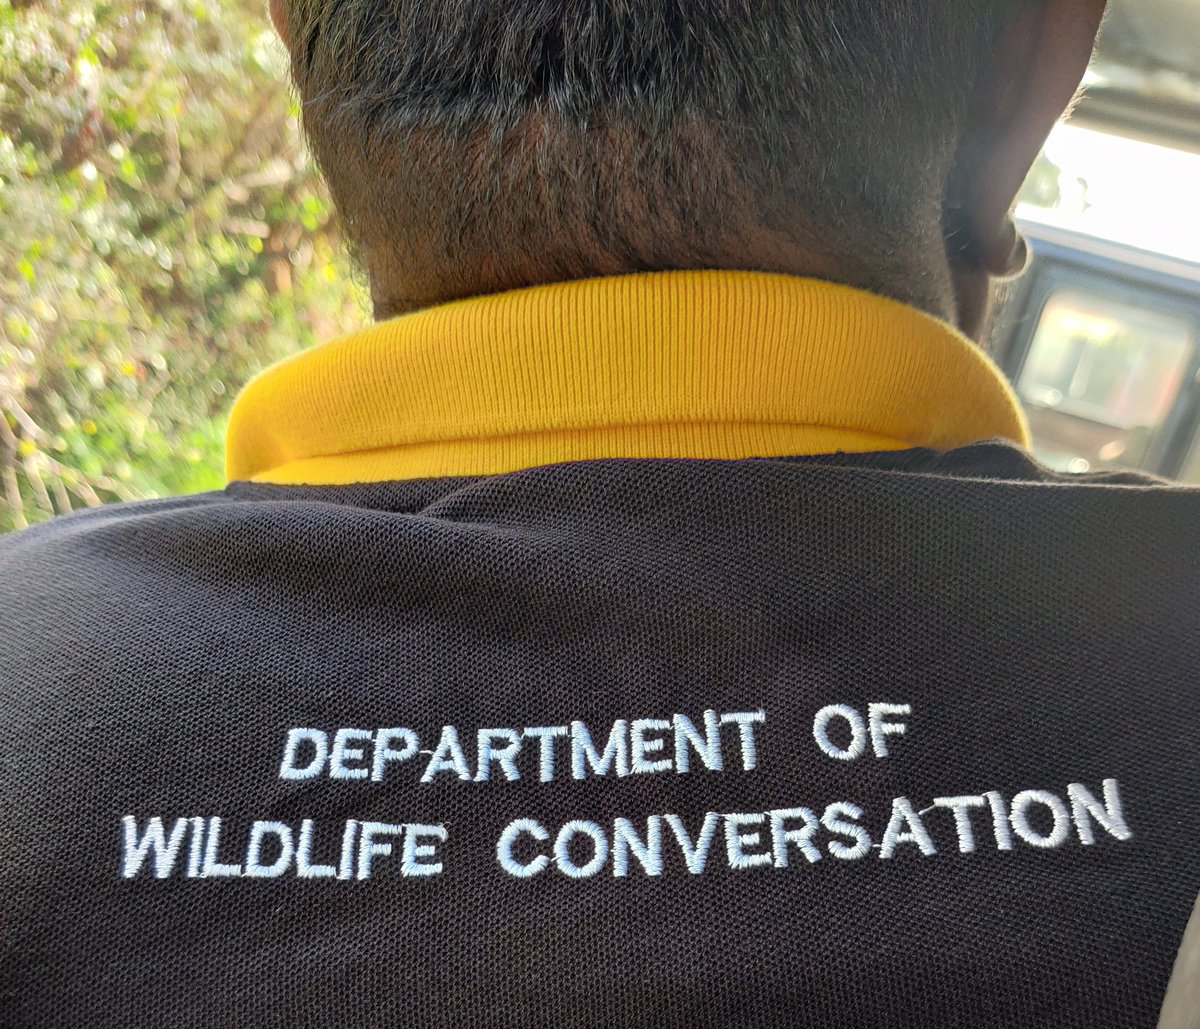 The perfect T-shirt for a wildlife guide...🤪